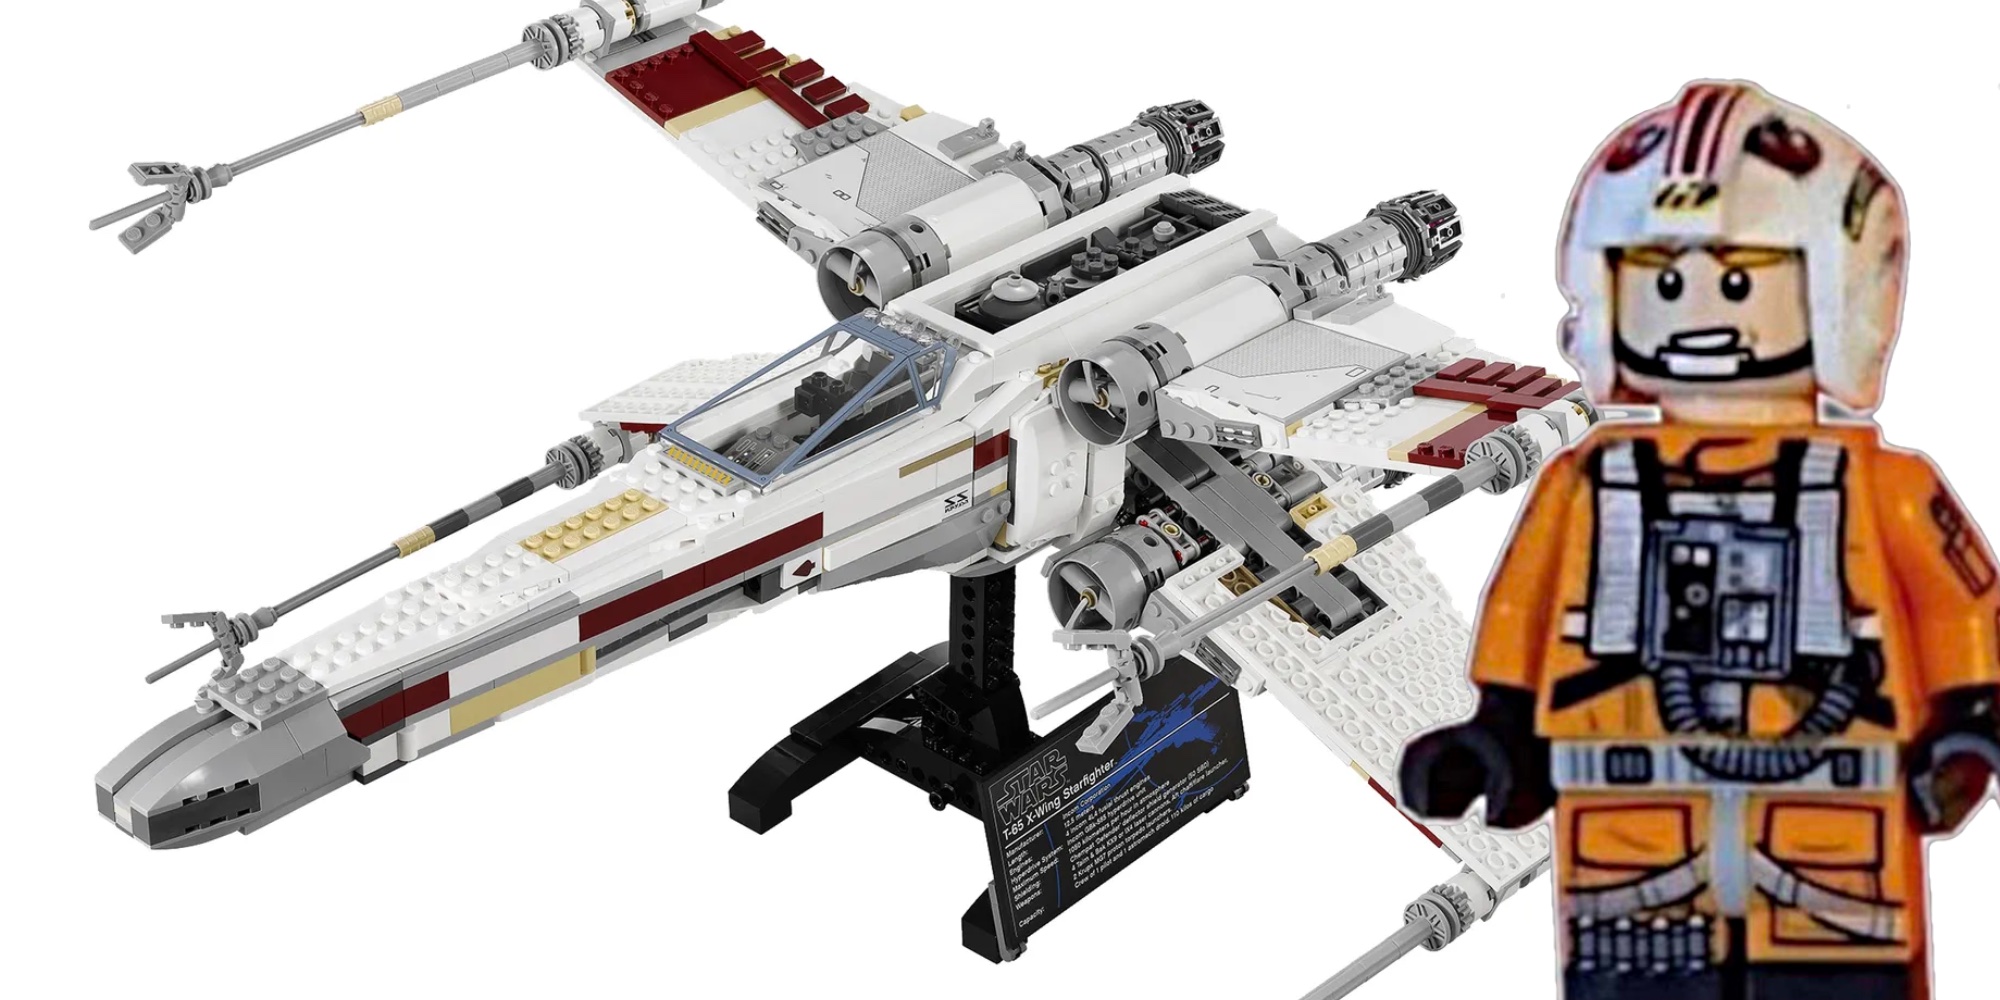 LEGO UCS X-Wing set launching of May the 4th